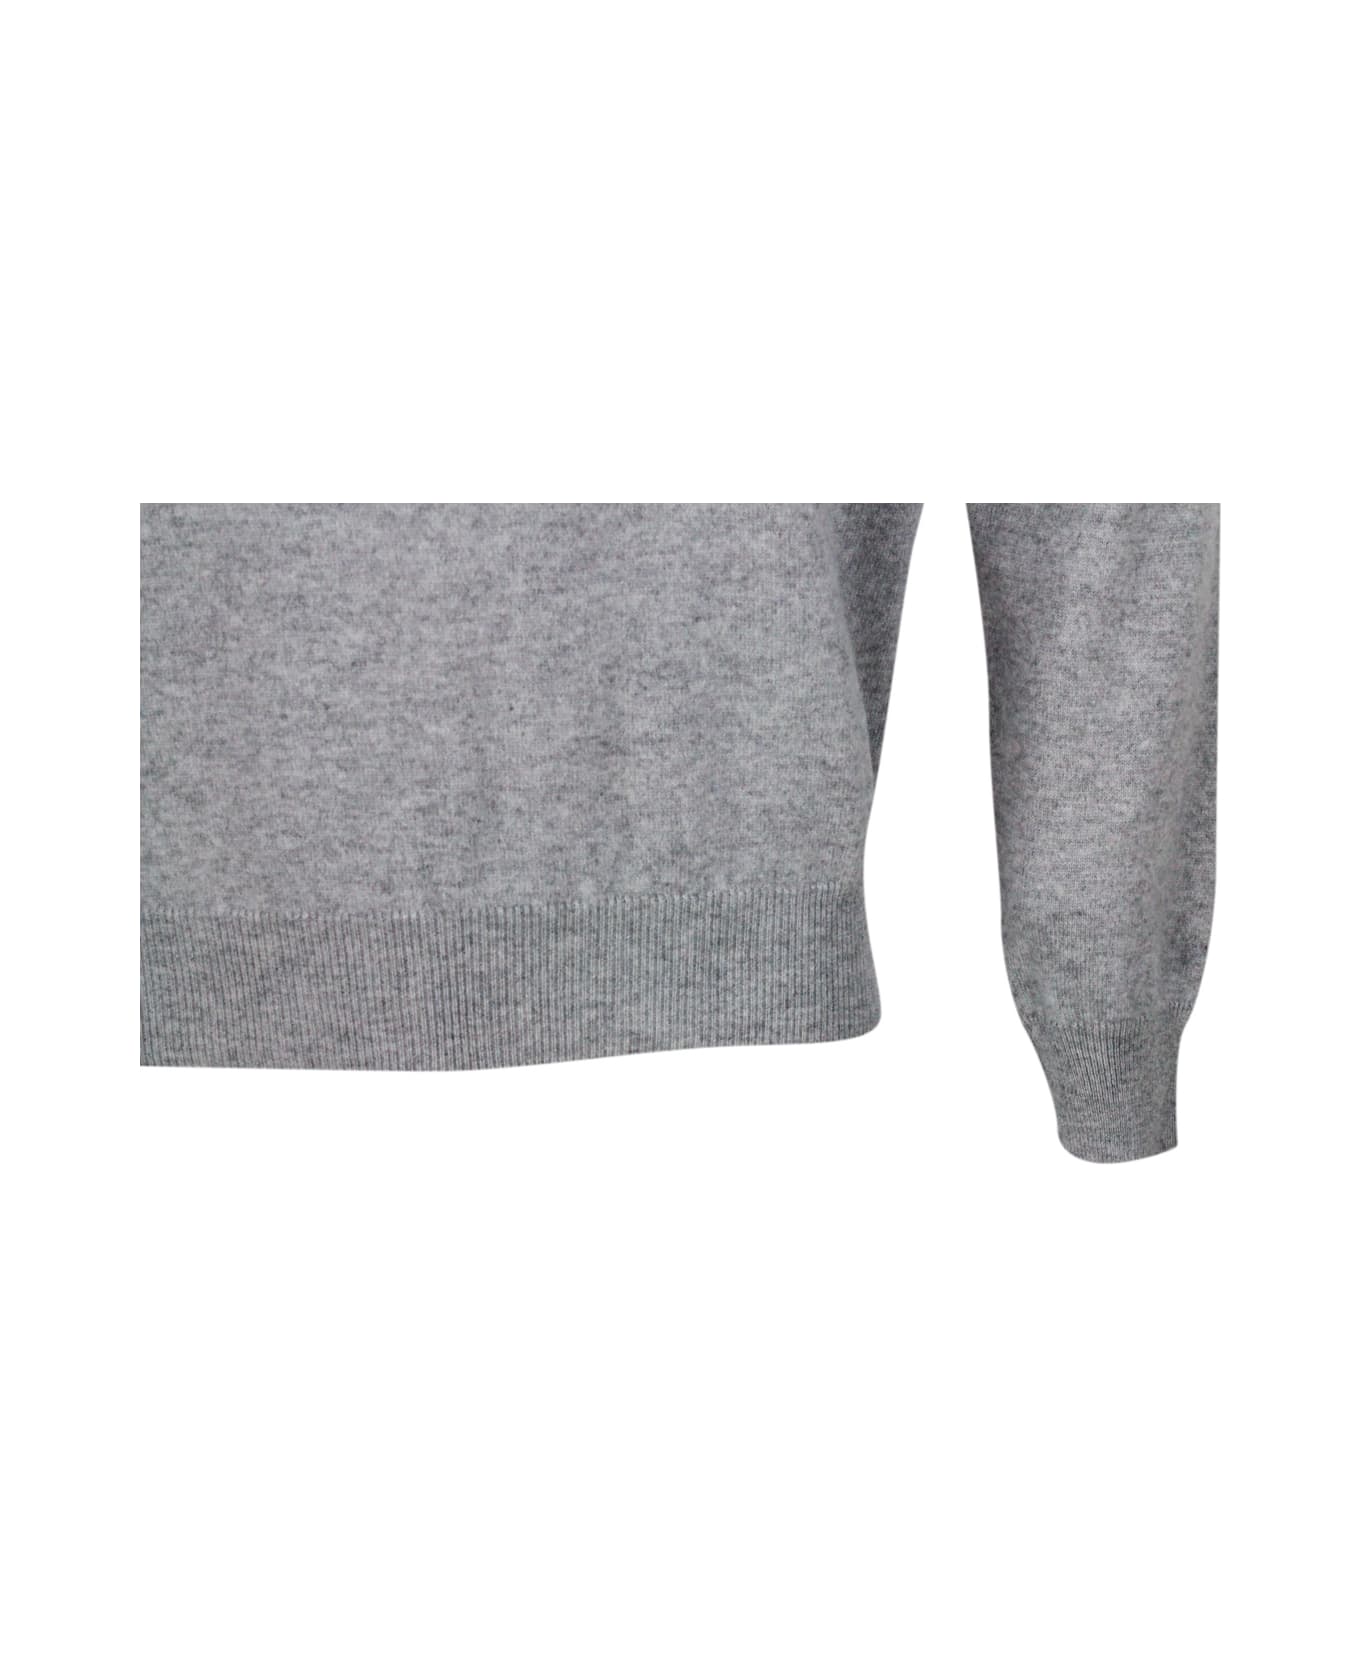 Colombo Long-sleeved V-neck Sweater In Fine 2-ply 100% Kid Cashmere With Special Processing On The Edge Of The Neck - Grey